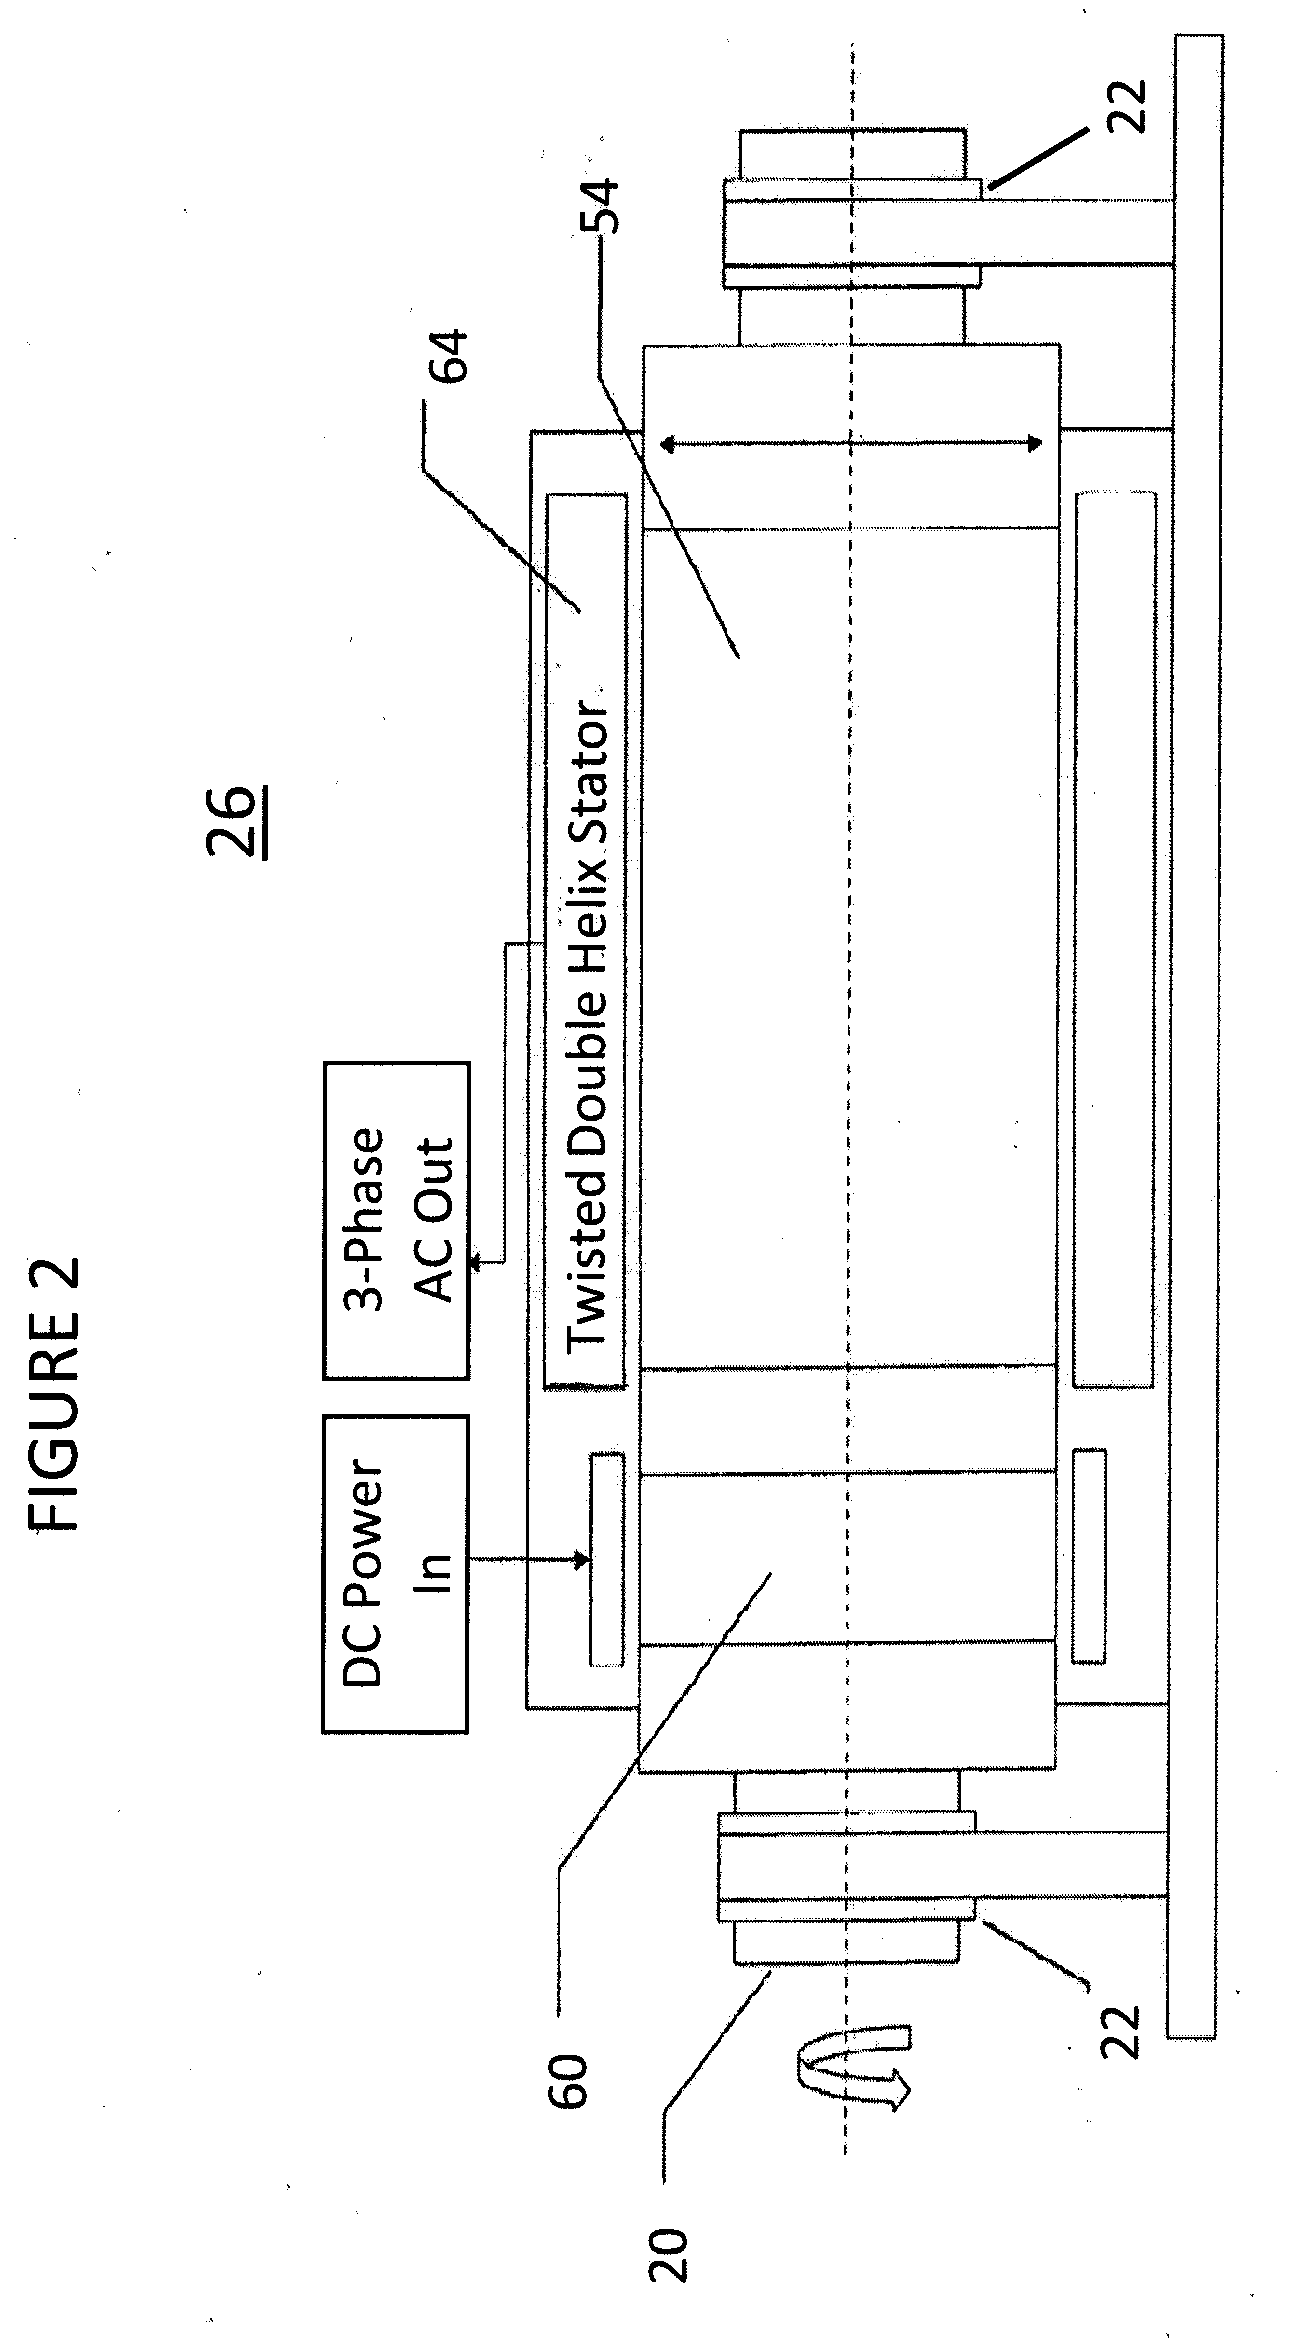 Electrical Machinery Incorporating Double Helix Coil Designs For Superconducting and Resistive Windings